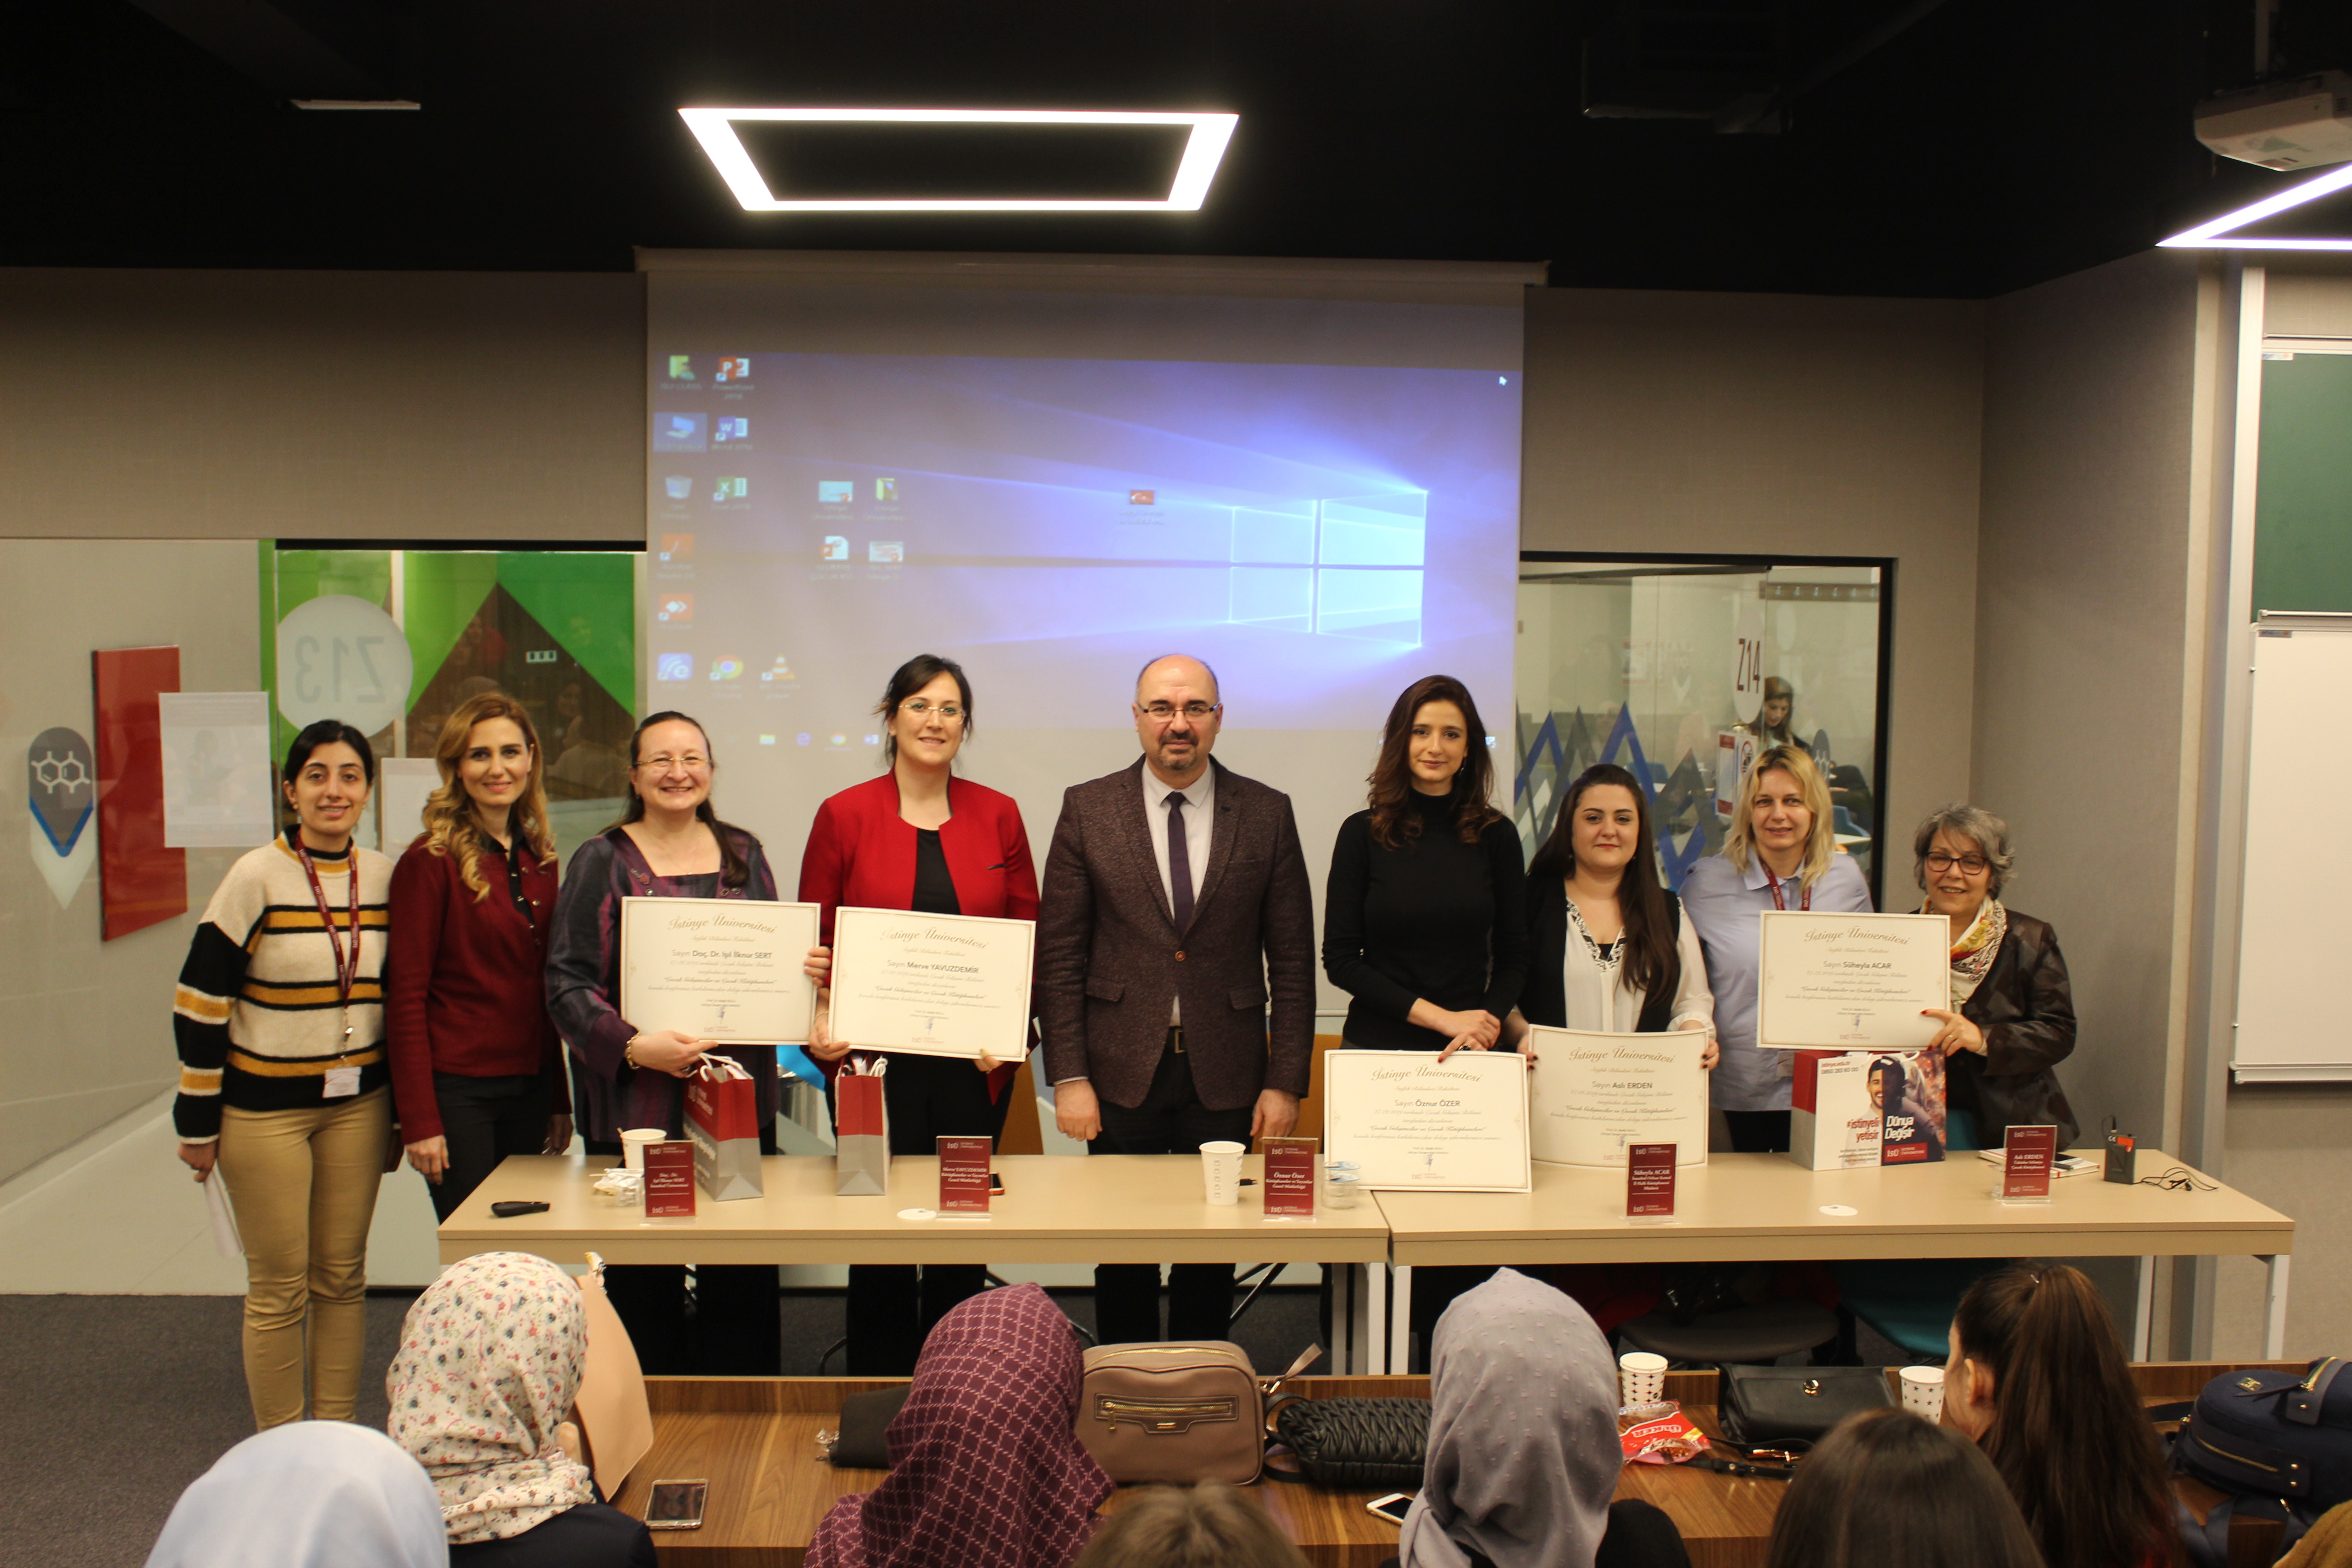 Organized by Child Development Department of İstinye University Health Sciences Faculty